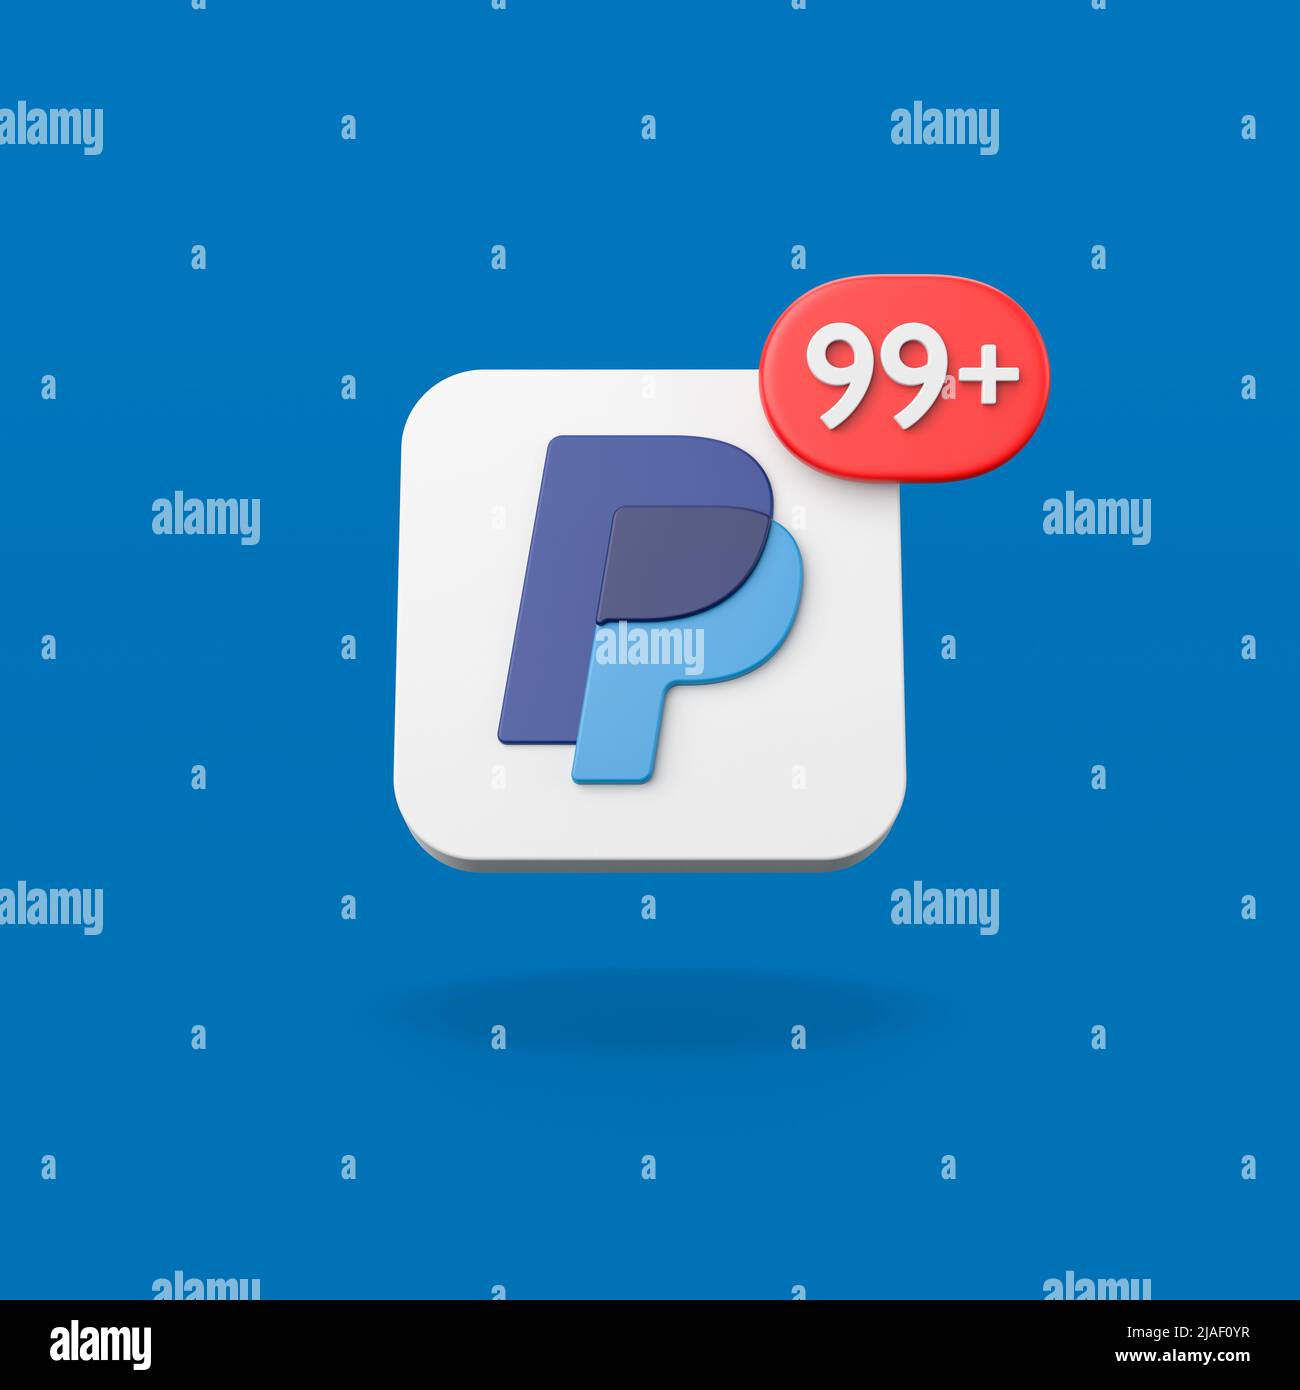 Paypal Logo with 99 Notification on Blue Background Stock Photo